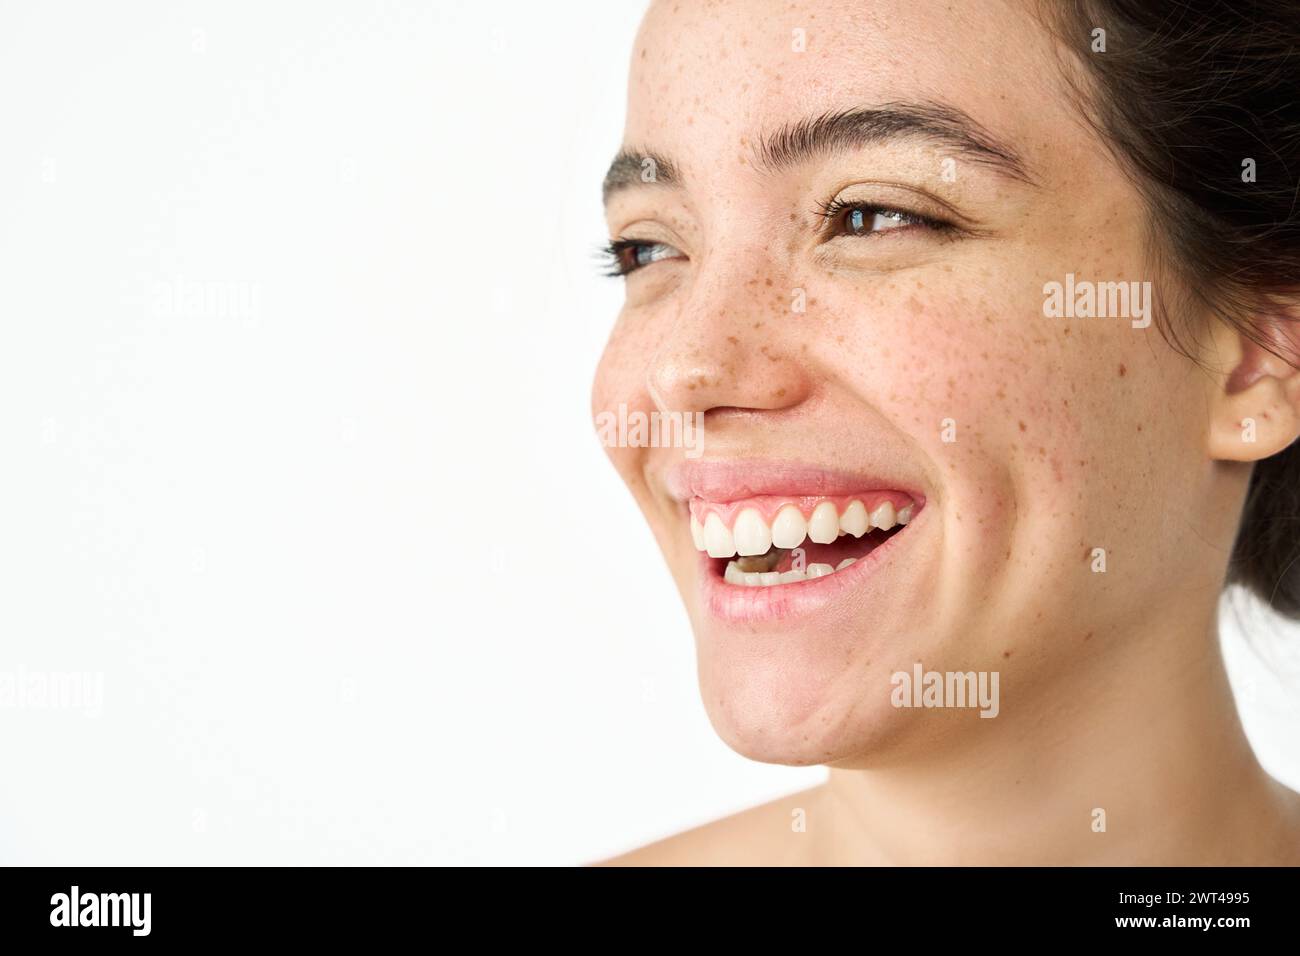 Happy young woman freckled face dental smile isolated on white. Skin care. Stock Photo